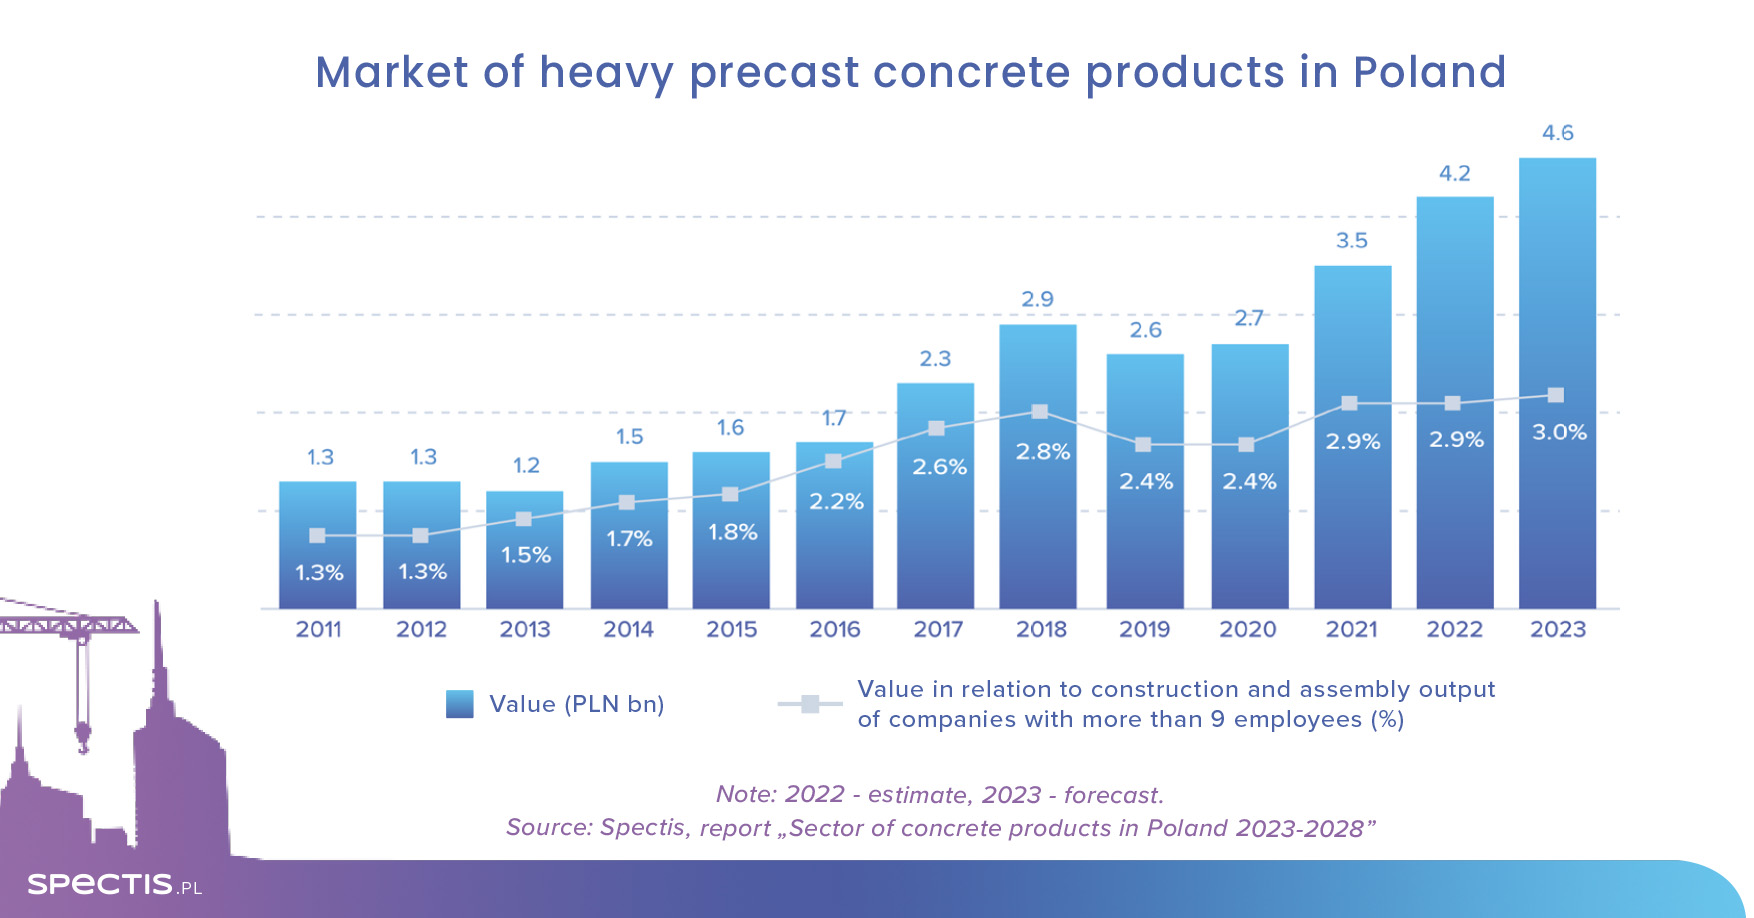 Value of the heavy precast concrete products sector in Poland to reach PLN 5bn by 2025